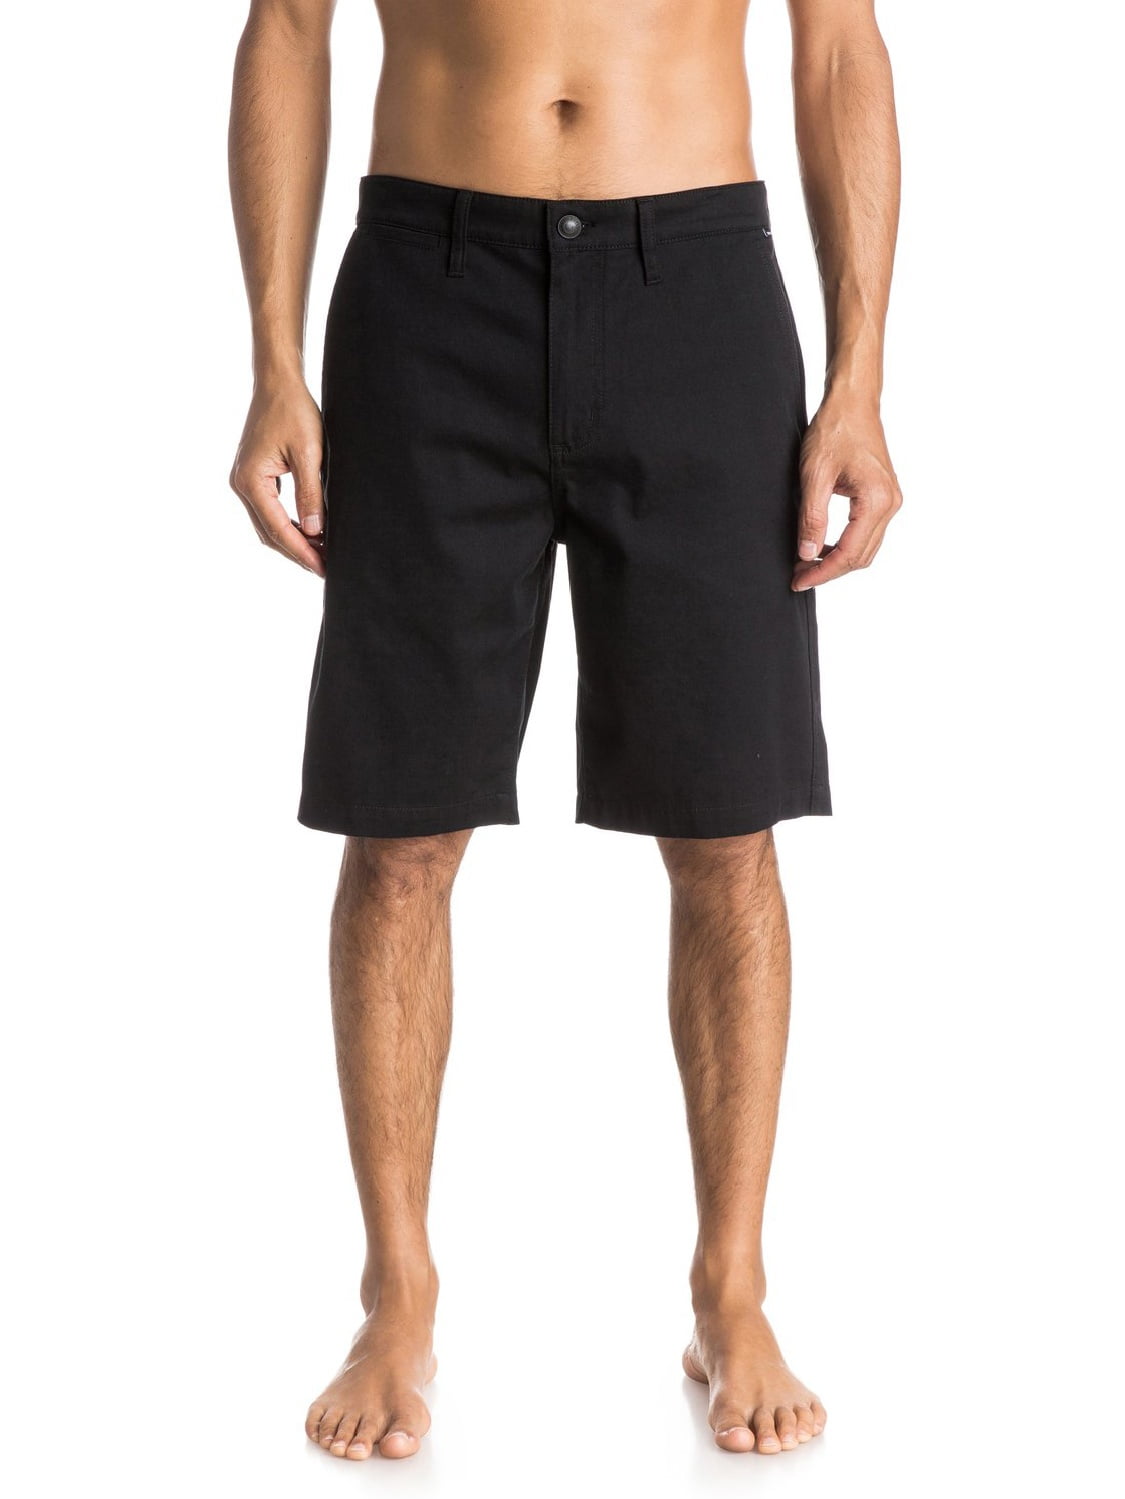 Quiksilver Casual Stretch - Union Black Mens Shorts Everyday